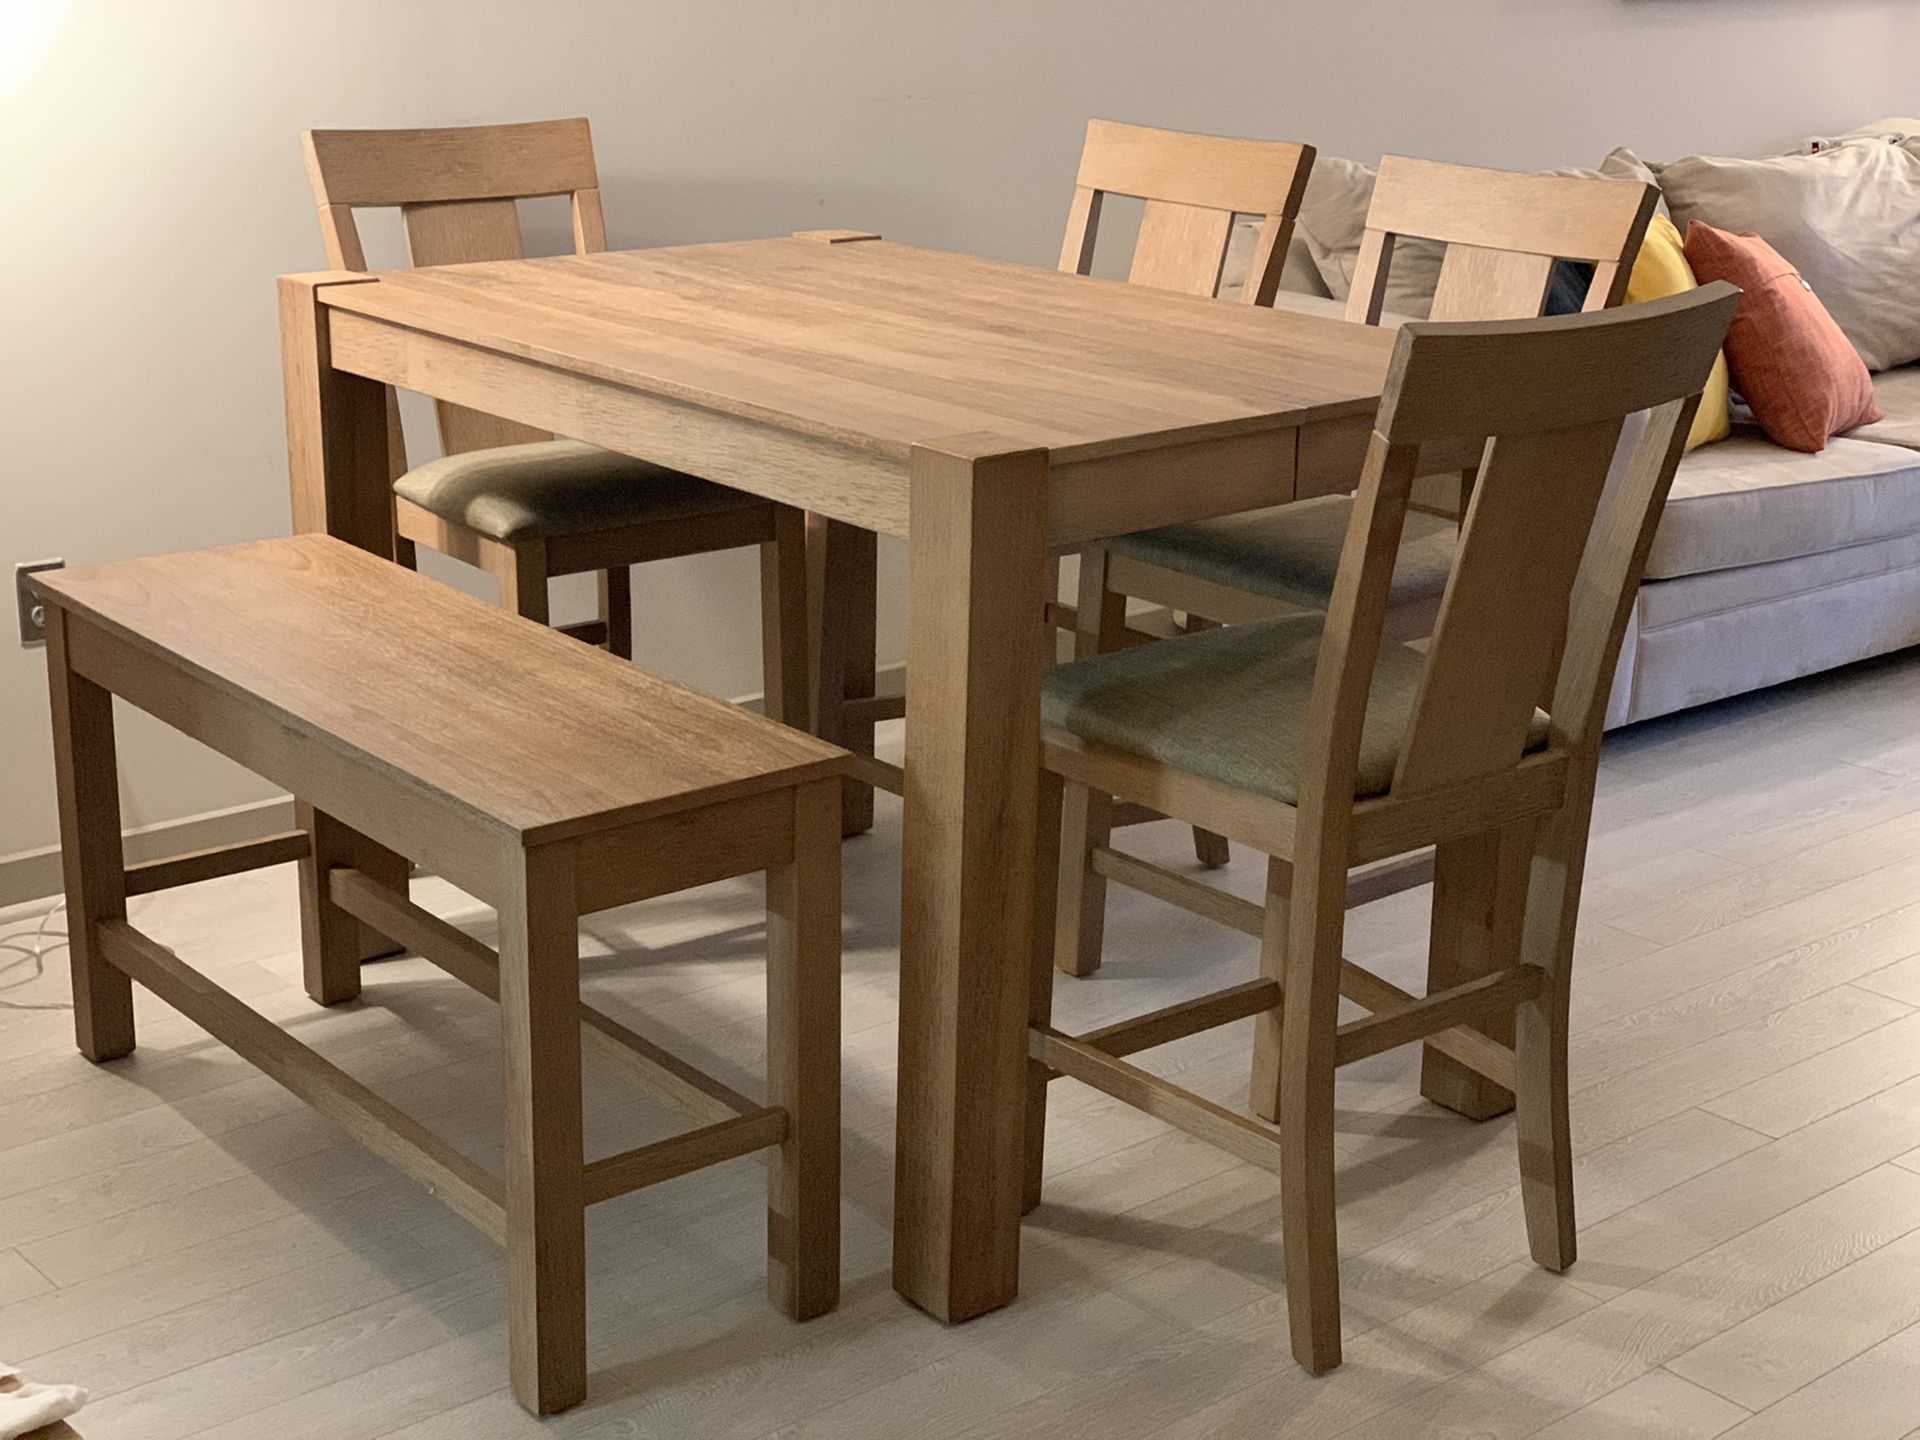 7 Piece Dining Room Set with Storage Bench & Server